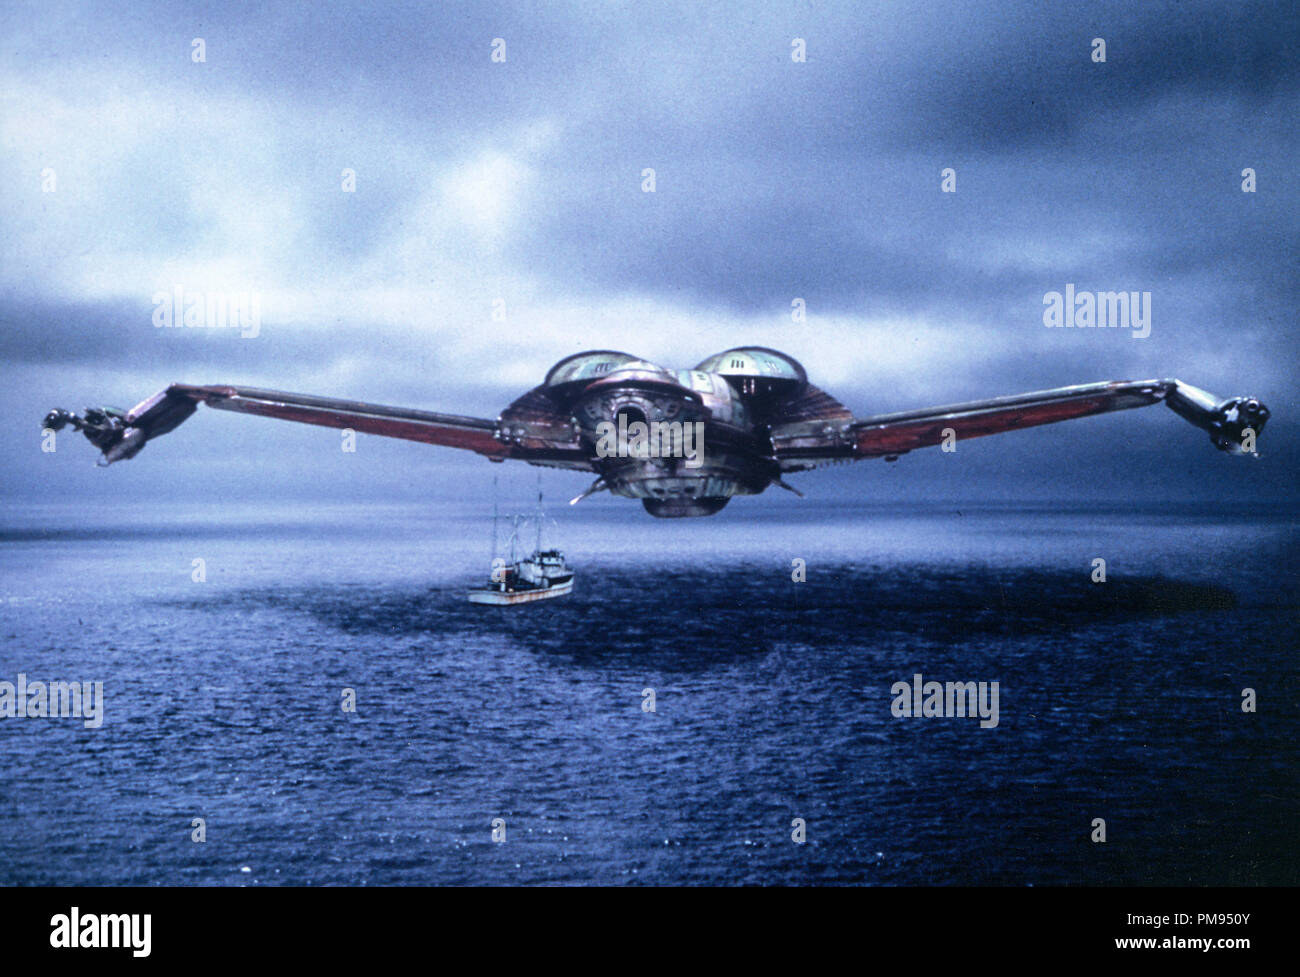 Studio Publicity Still from 'Star Trek IV: The Voyage Home' Scene Still © 1986 Paramount All Rights Reserved   File Reference # 31700084THA  For Editorial Use Only Stock Photo